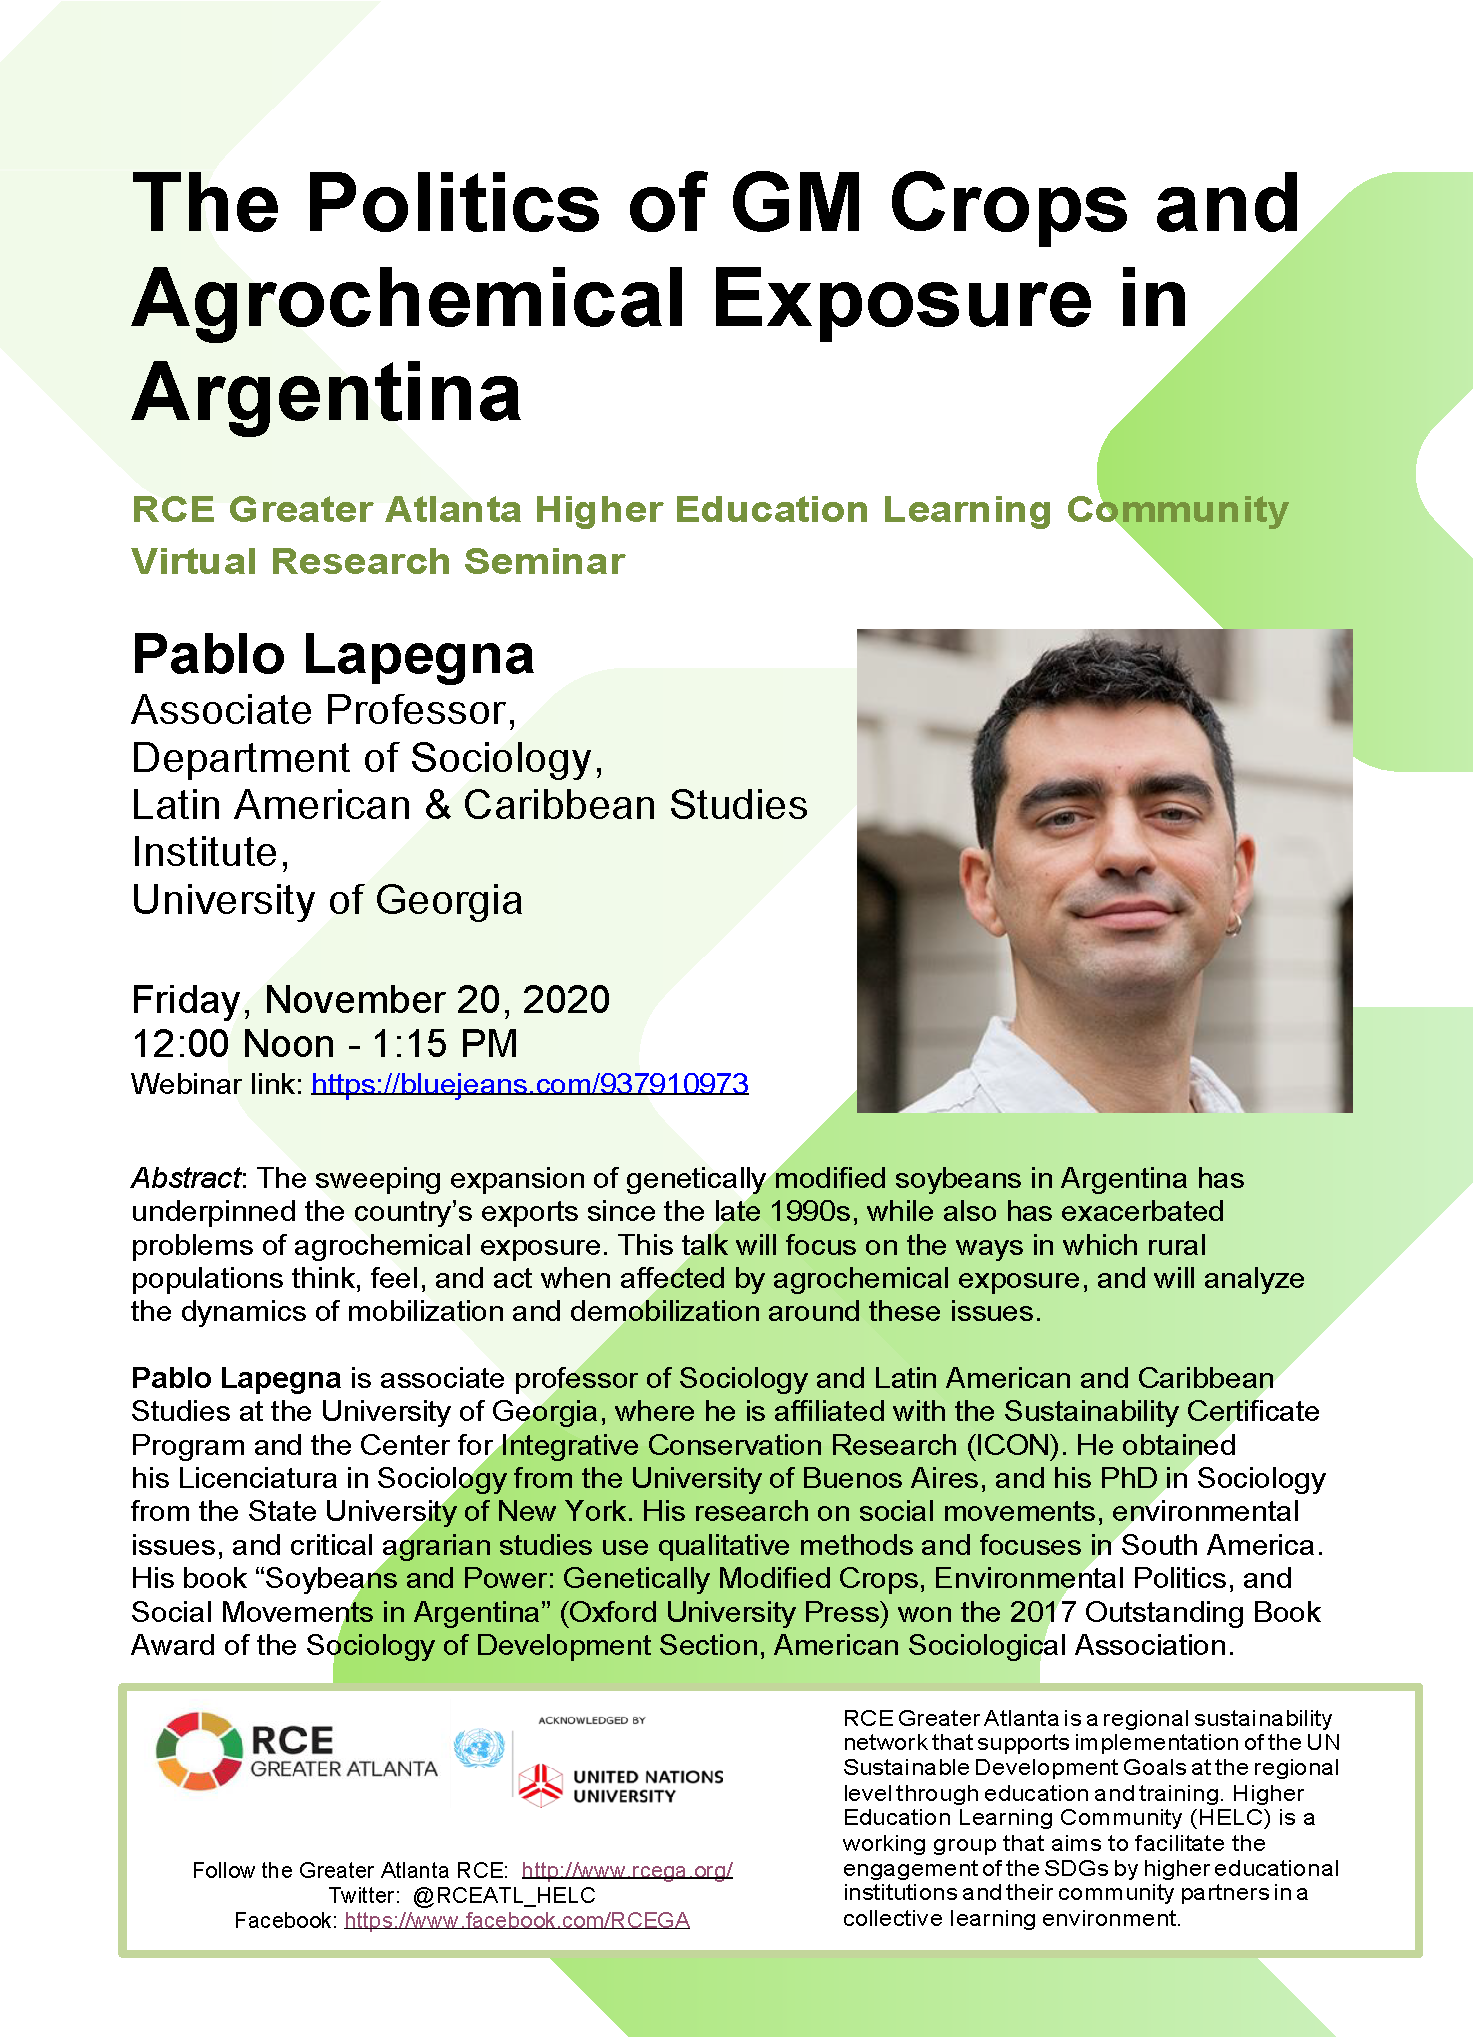 The Politics of GM Crops and Agrochemical Exposure in Argentina